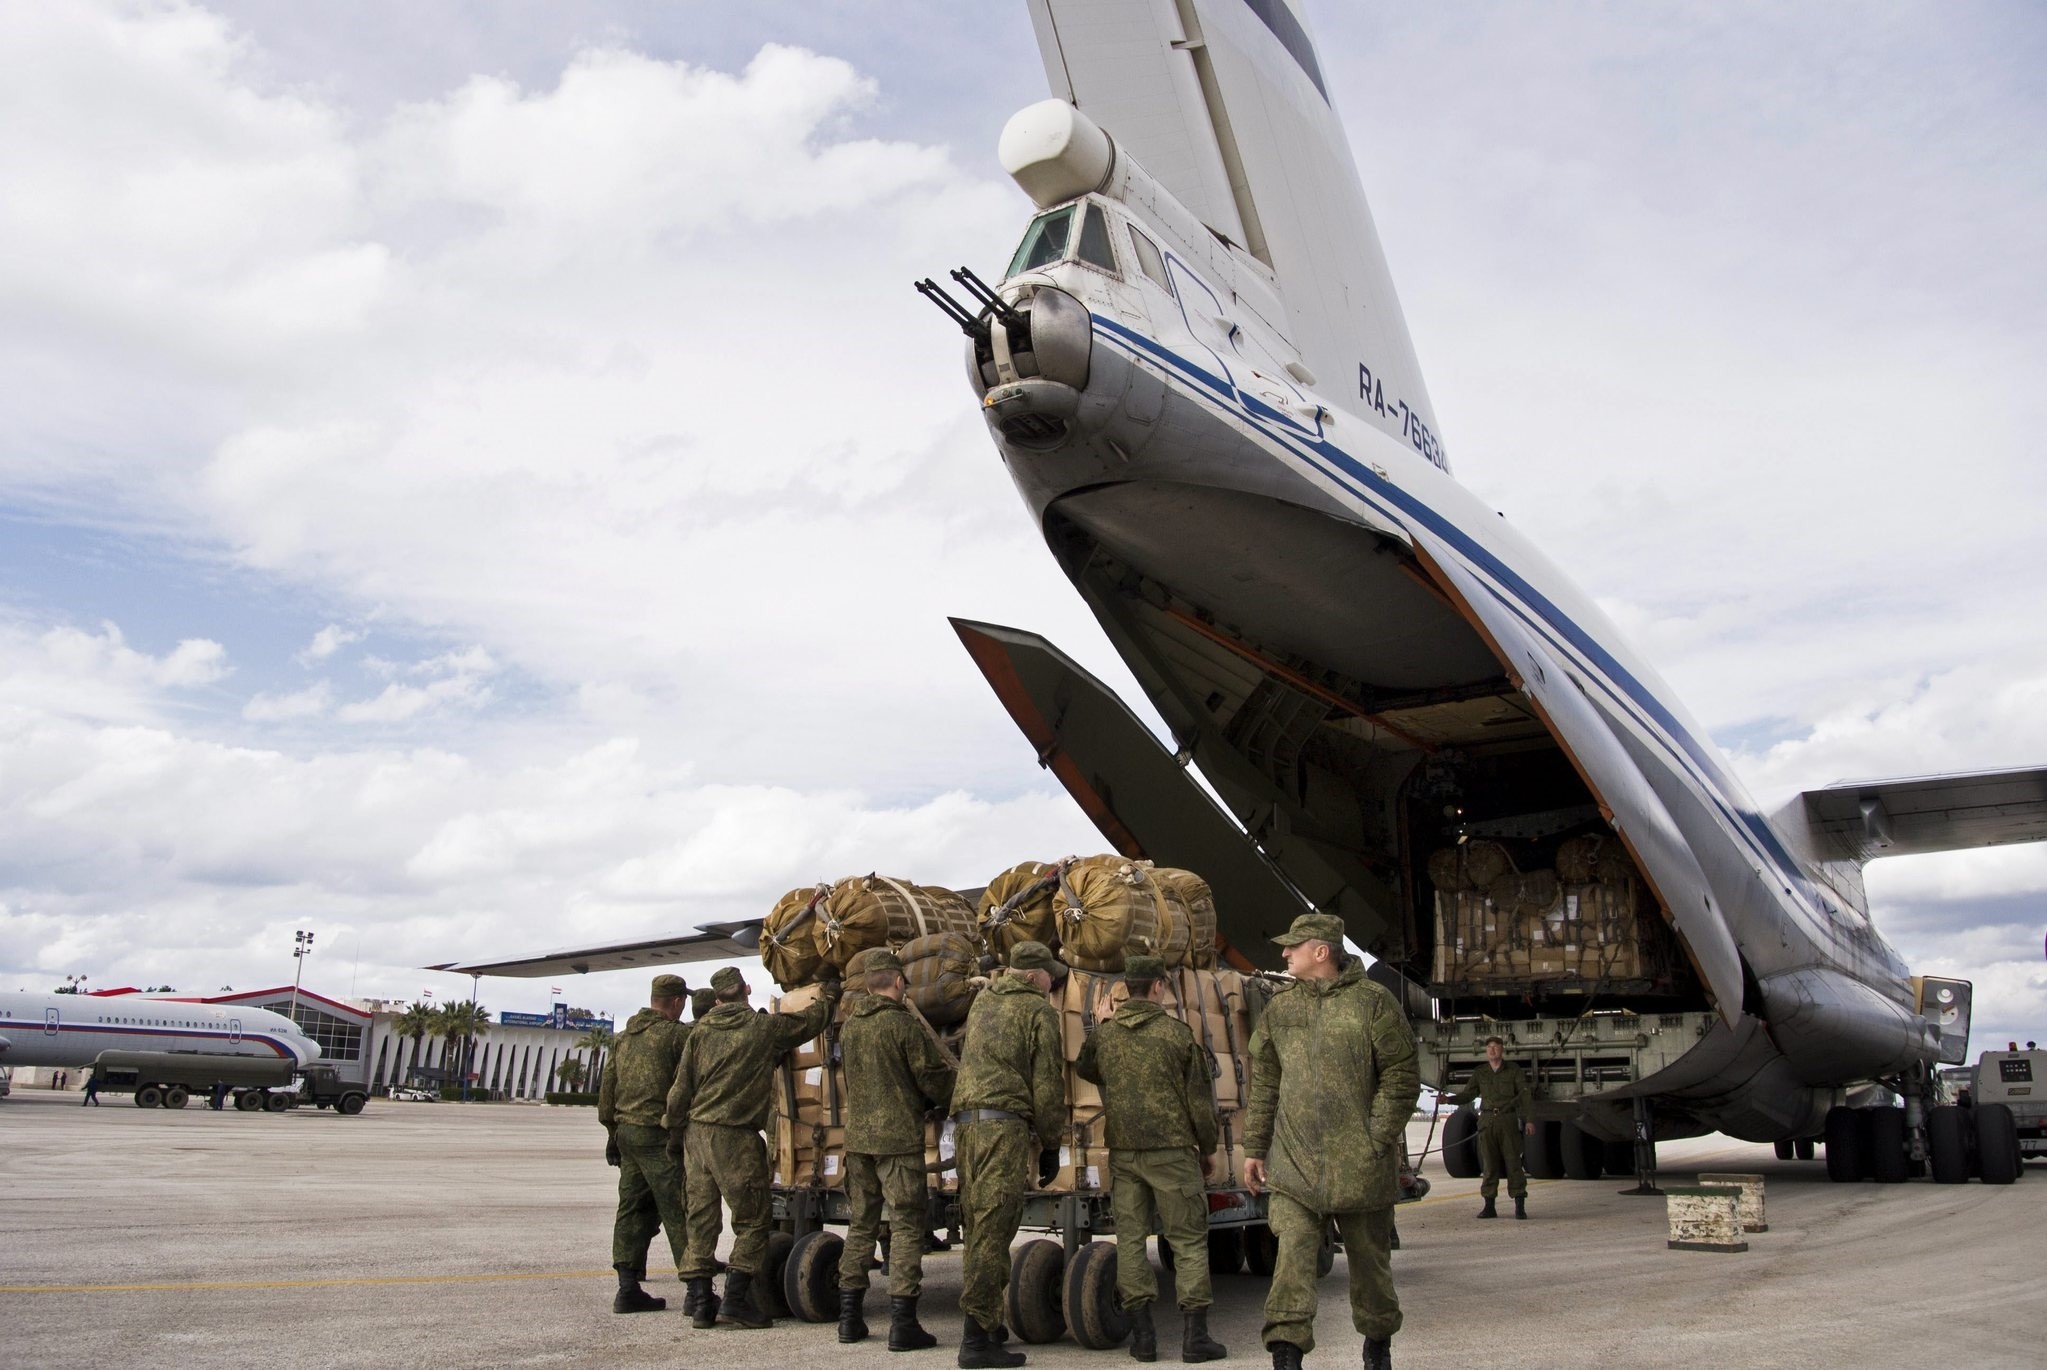 Russian air force personnel prepare to load humanitarian cargo on board a Syrian Il-76 plane at Hemeimeem air base in Syria. ((AP Photo)